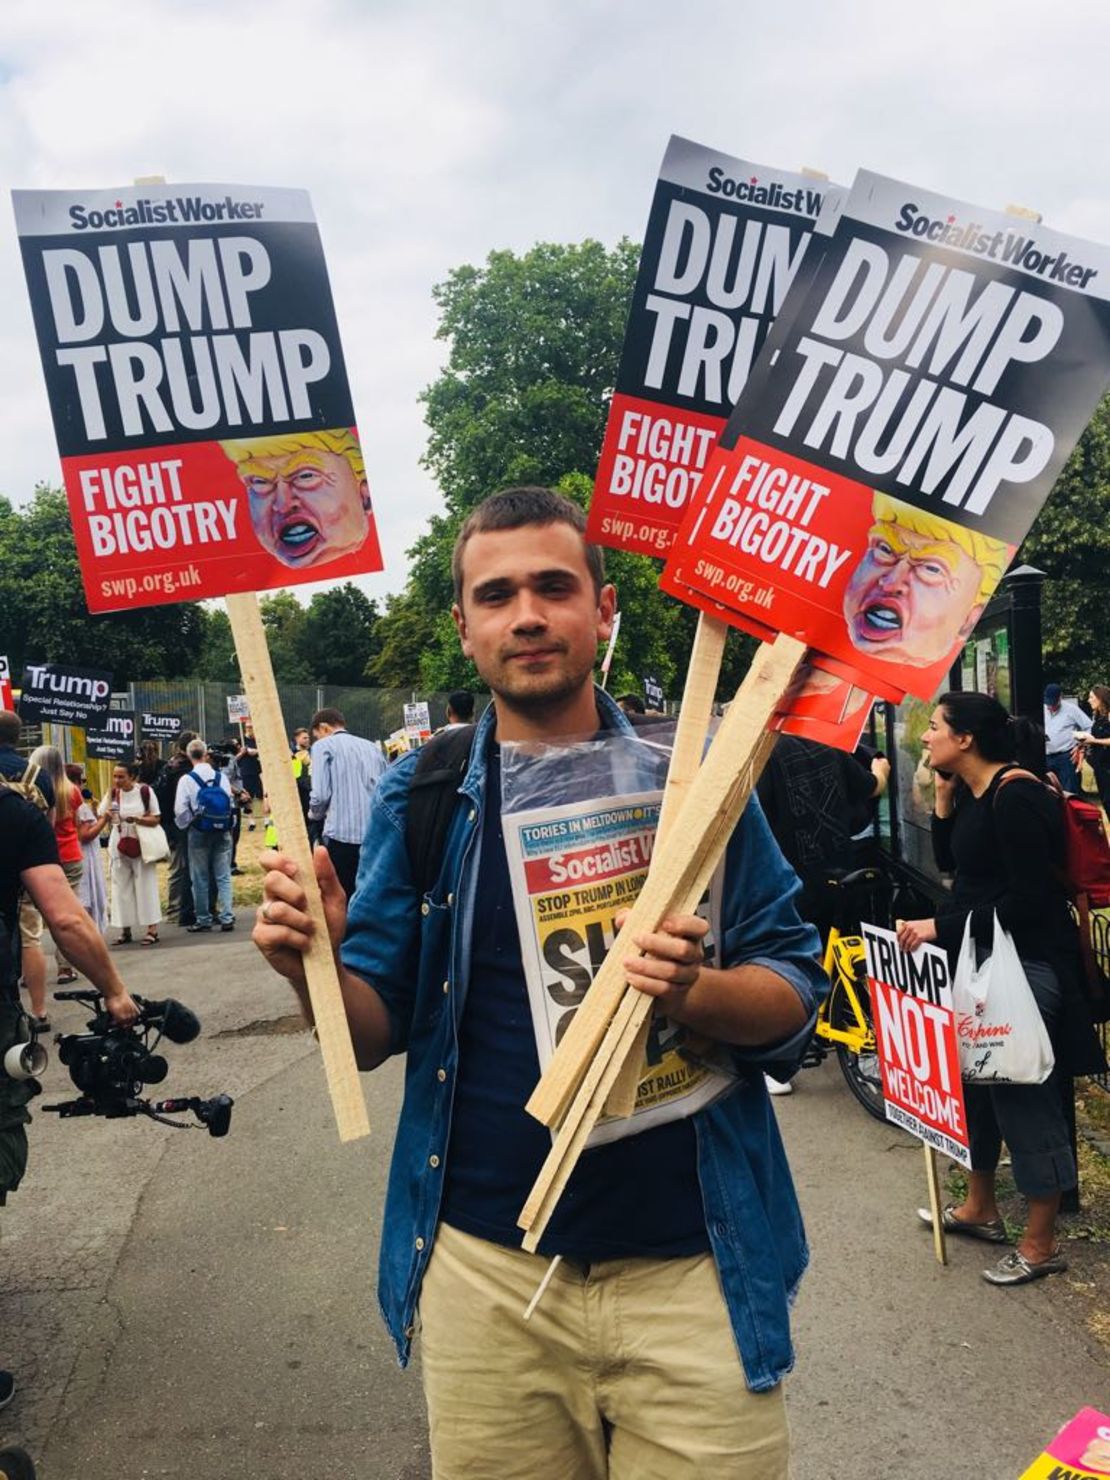 Lewis Nielson, 25, said that Trump "gives confidence to racists around the world," at a demonstration in Regent's Park on Thursday.
